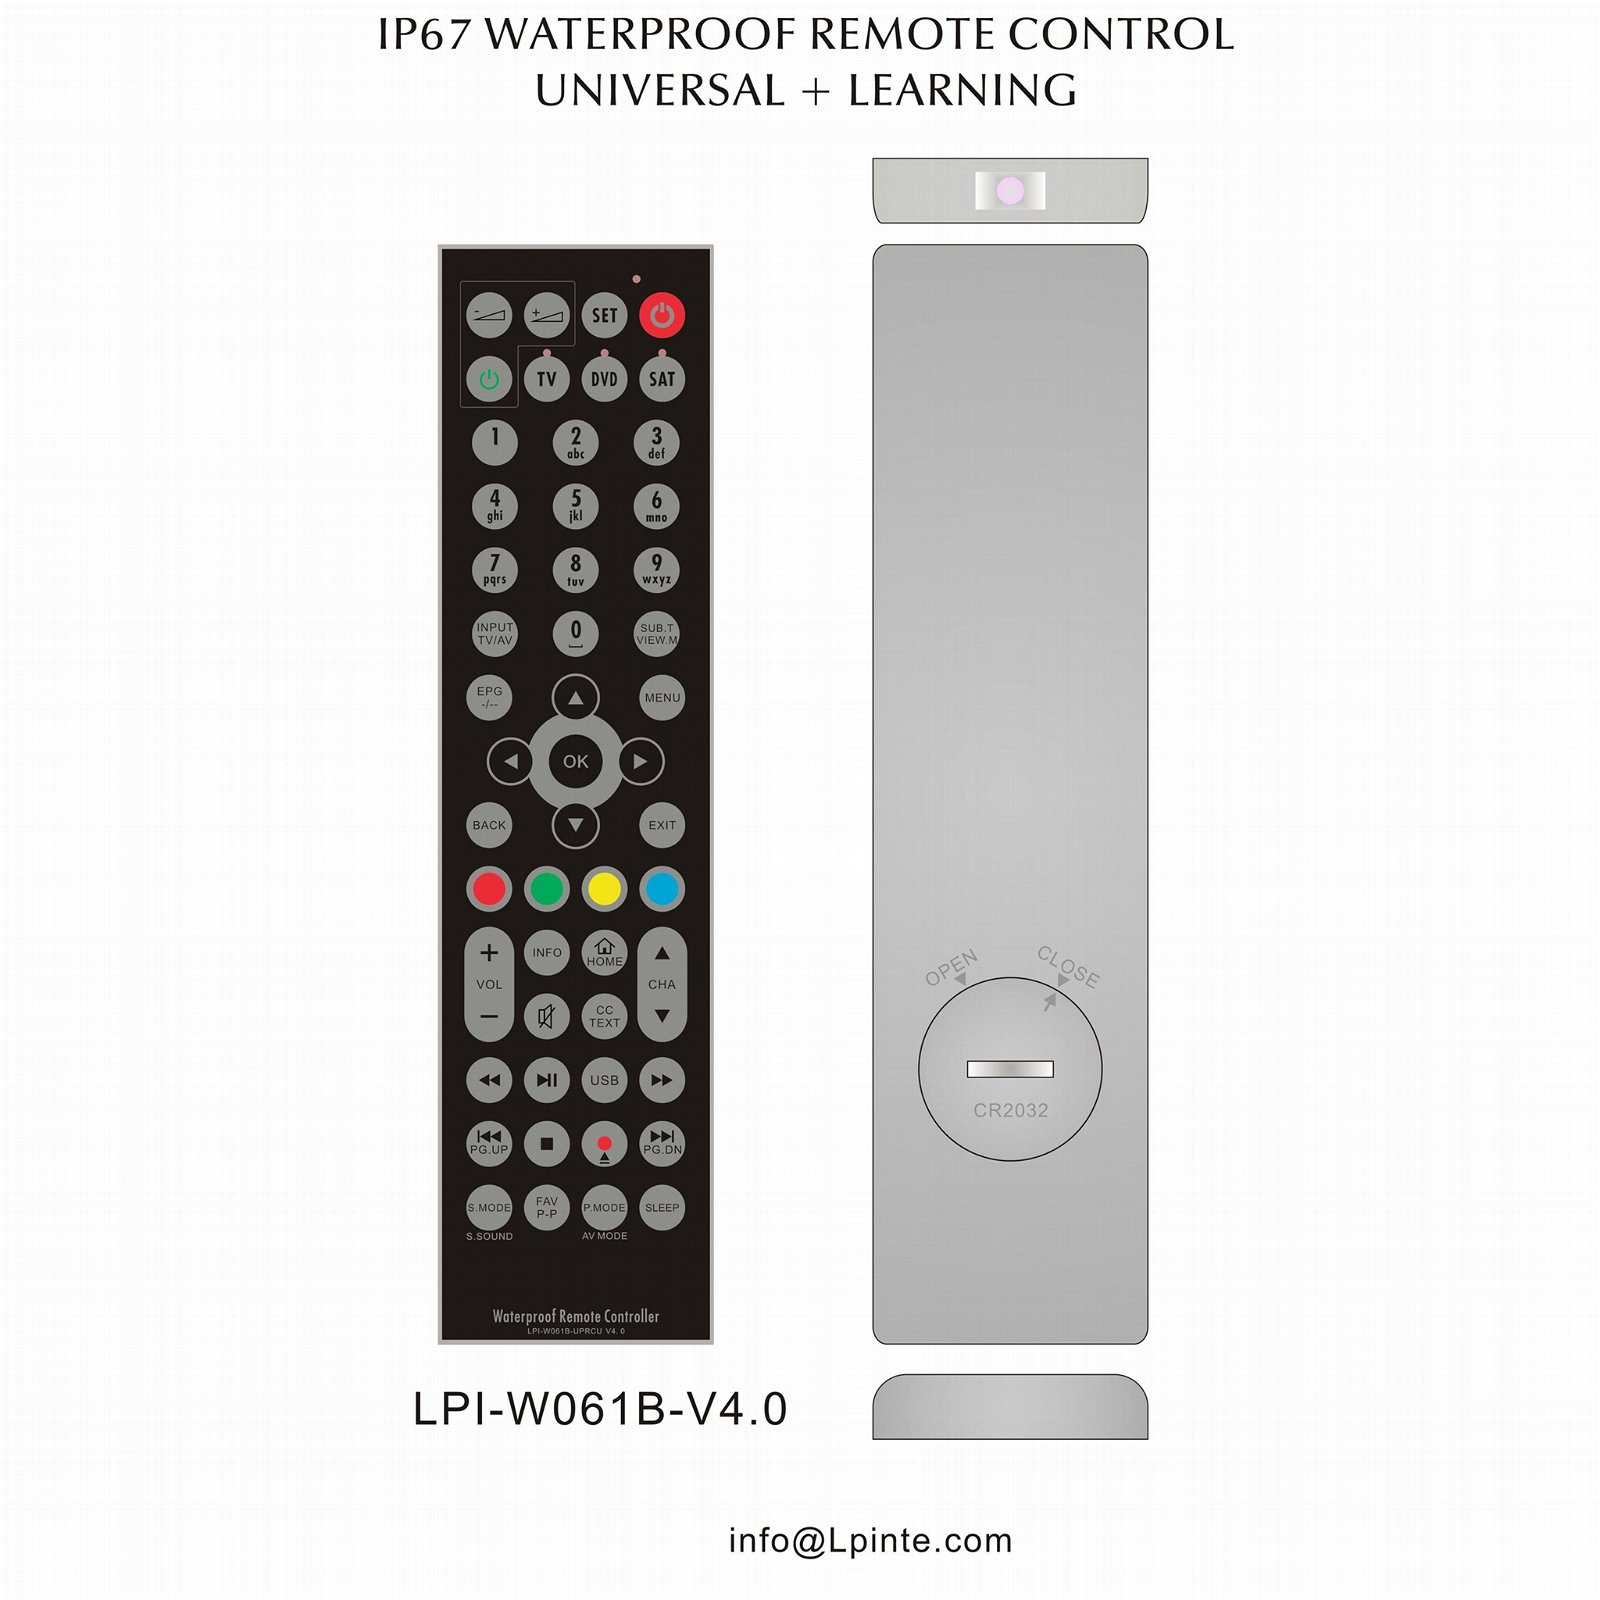 Universal and learning IC solution remote control